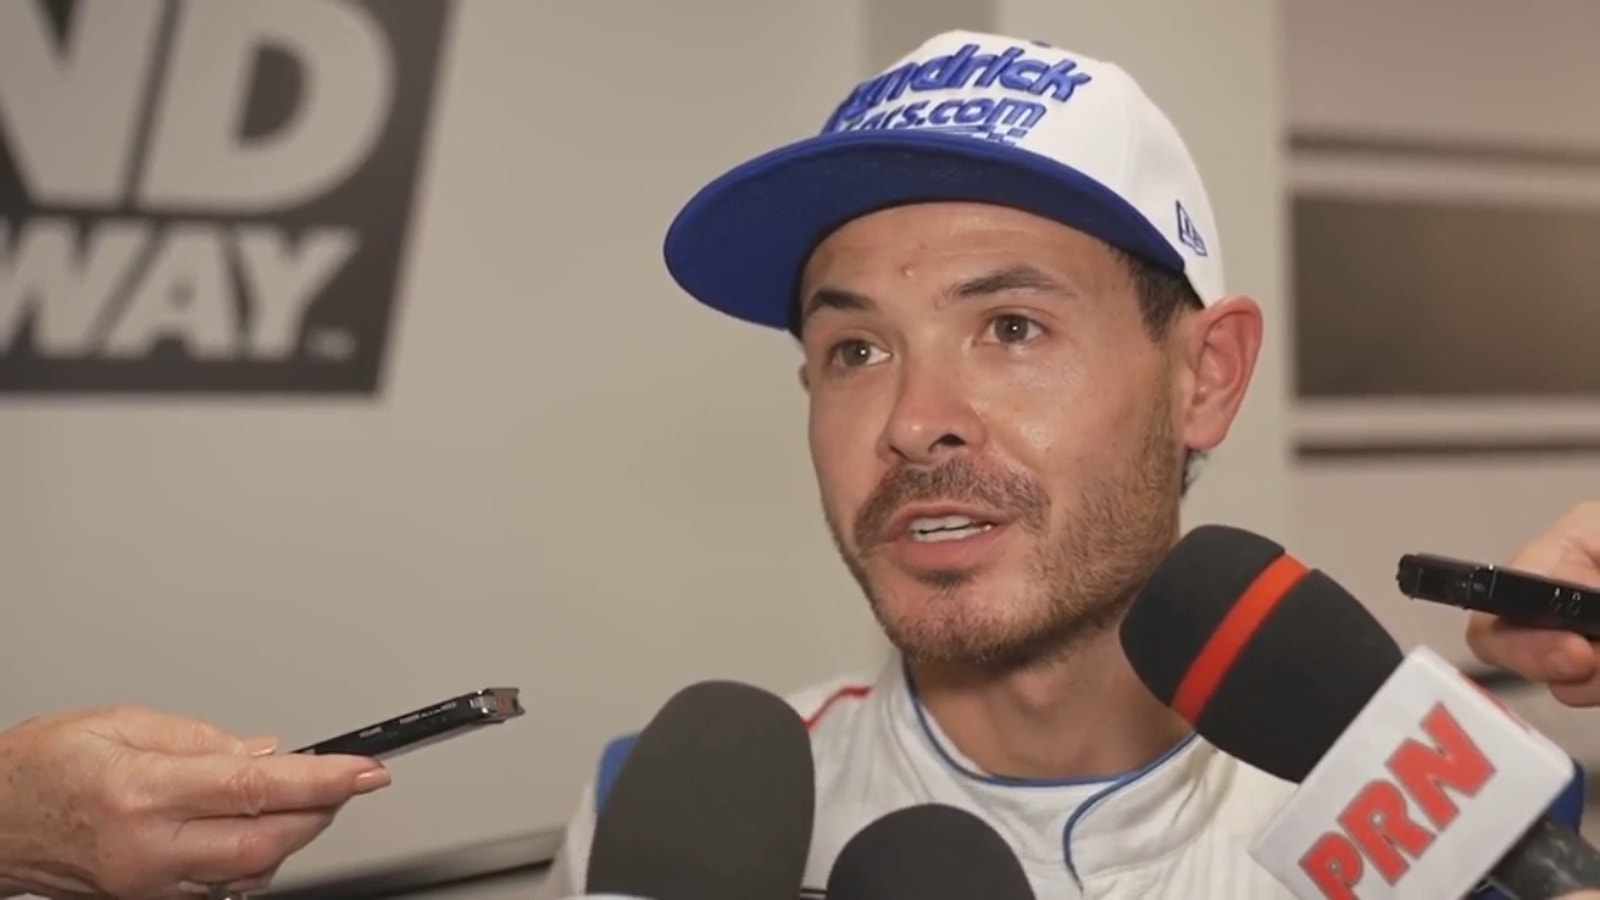  Kyle Larson on his frustration with the Pocono race finish